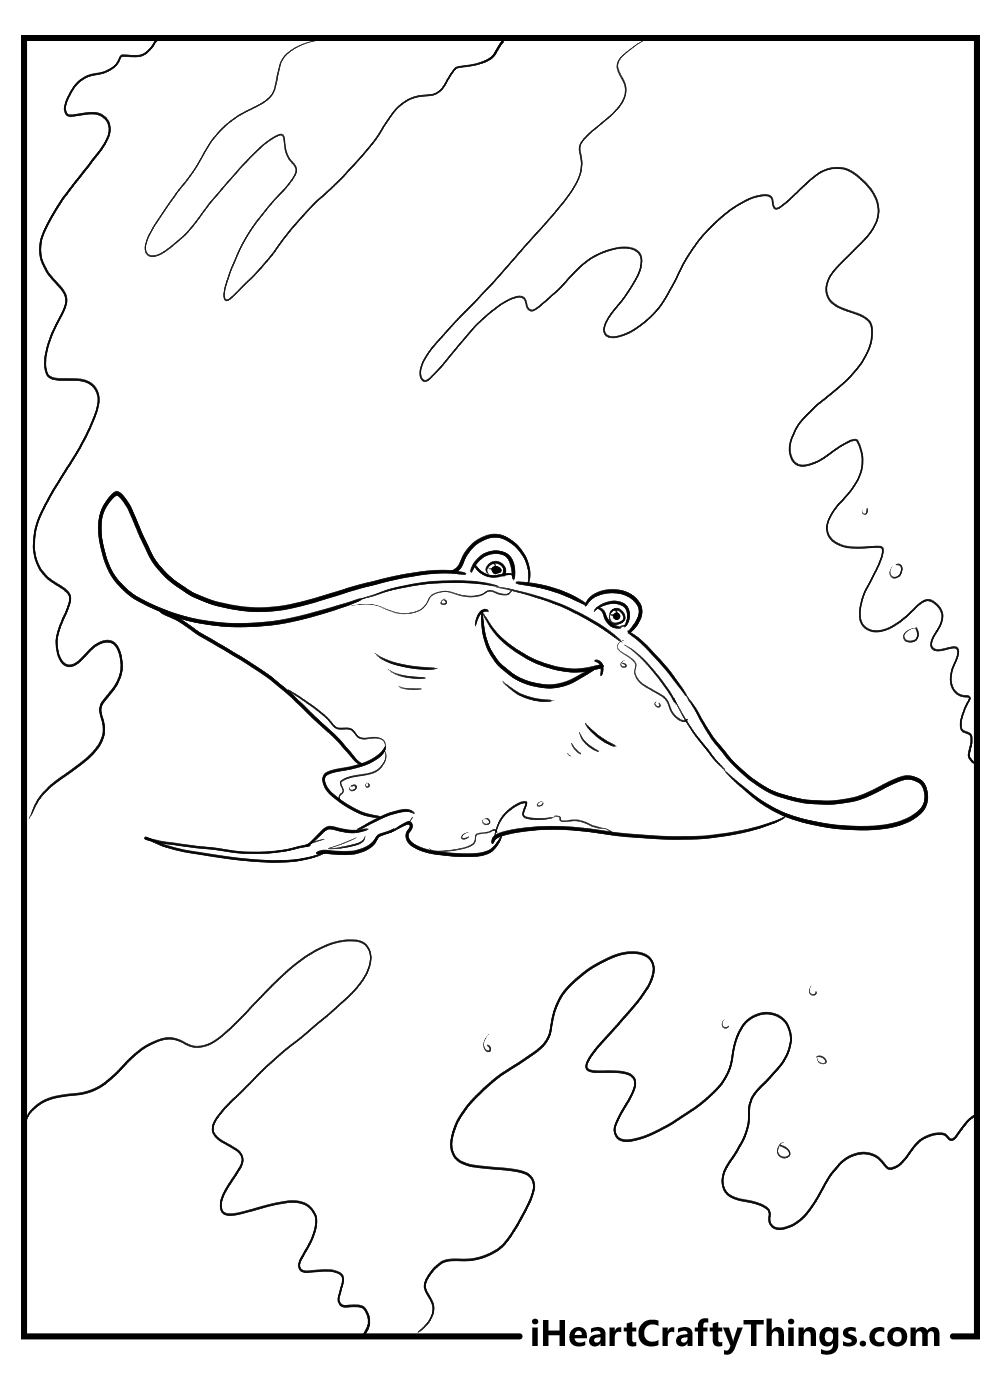 Mr Ray finding nemo coloring pages